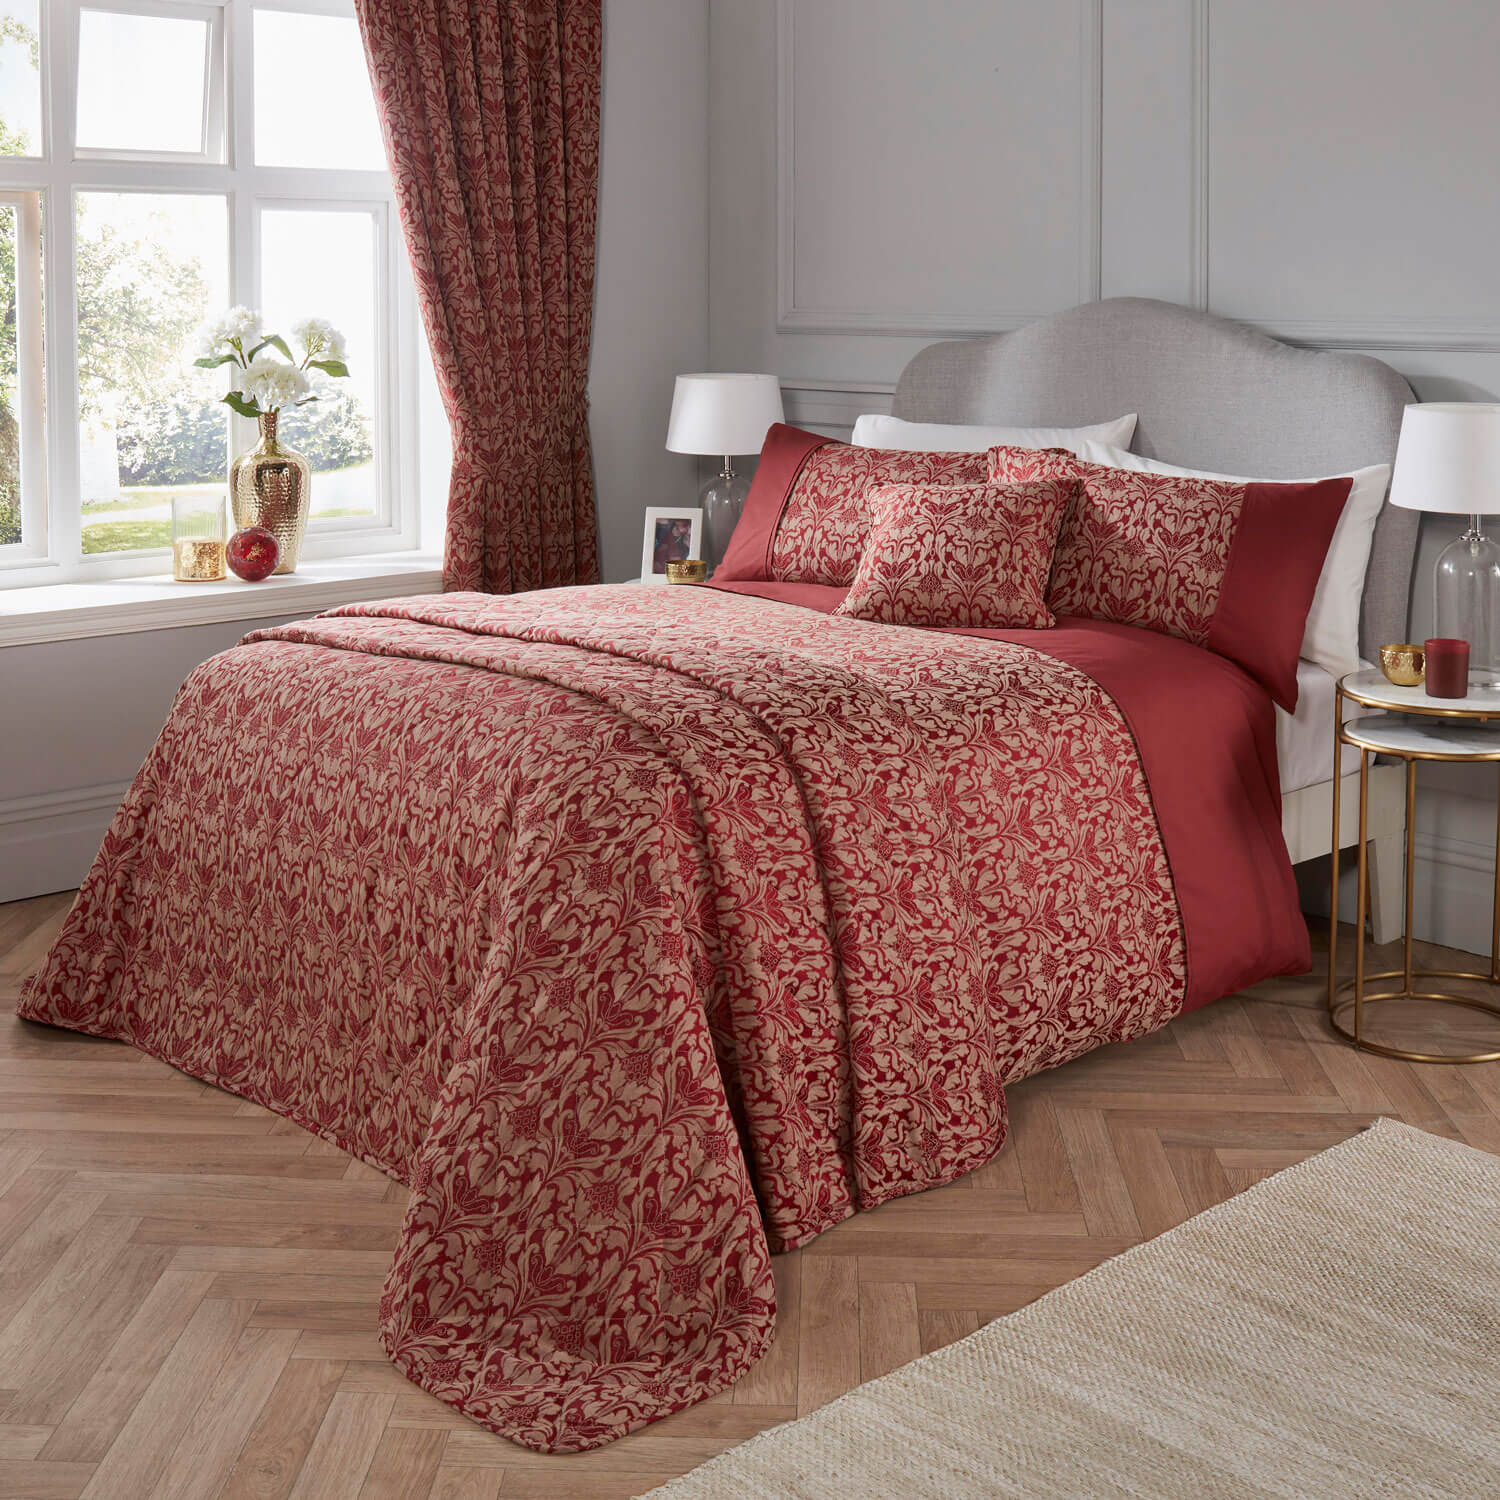 The Home Bedroom Hawthorn Bedspread - Wine 1 Shaws Department Stores